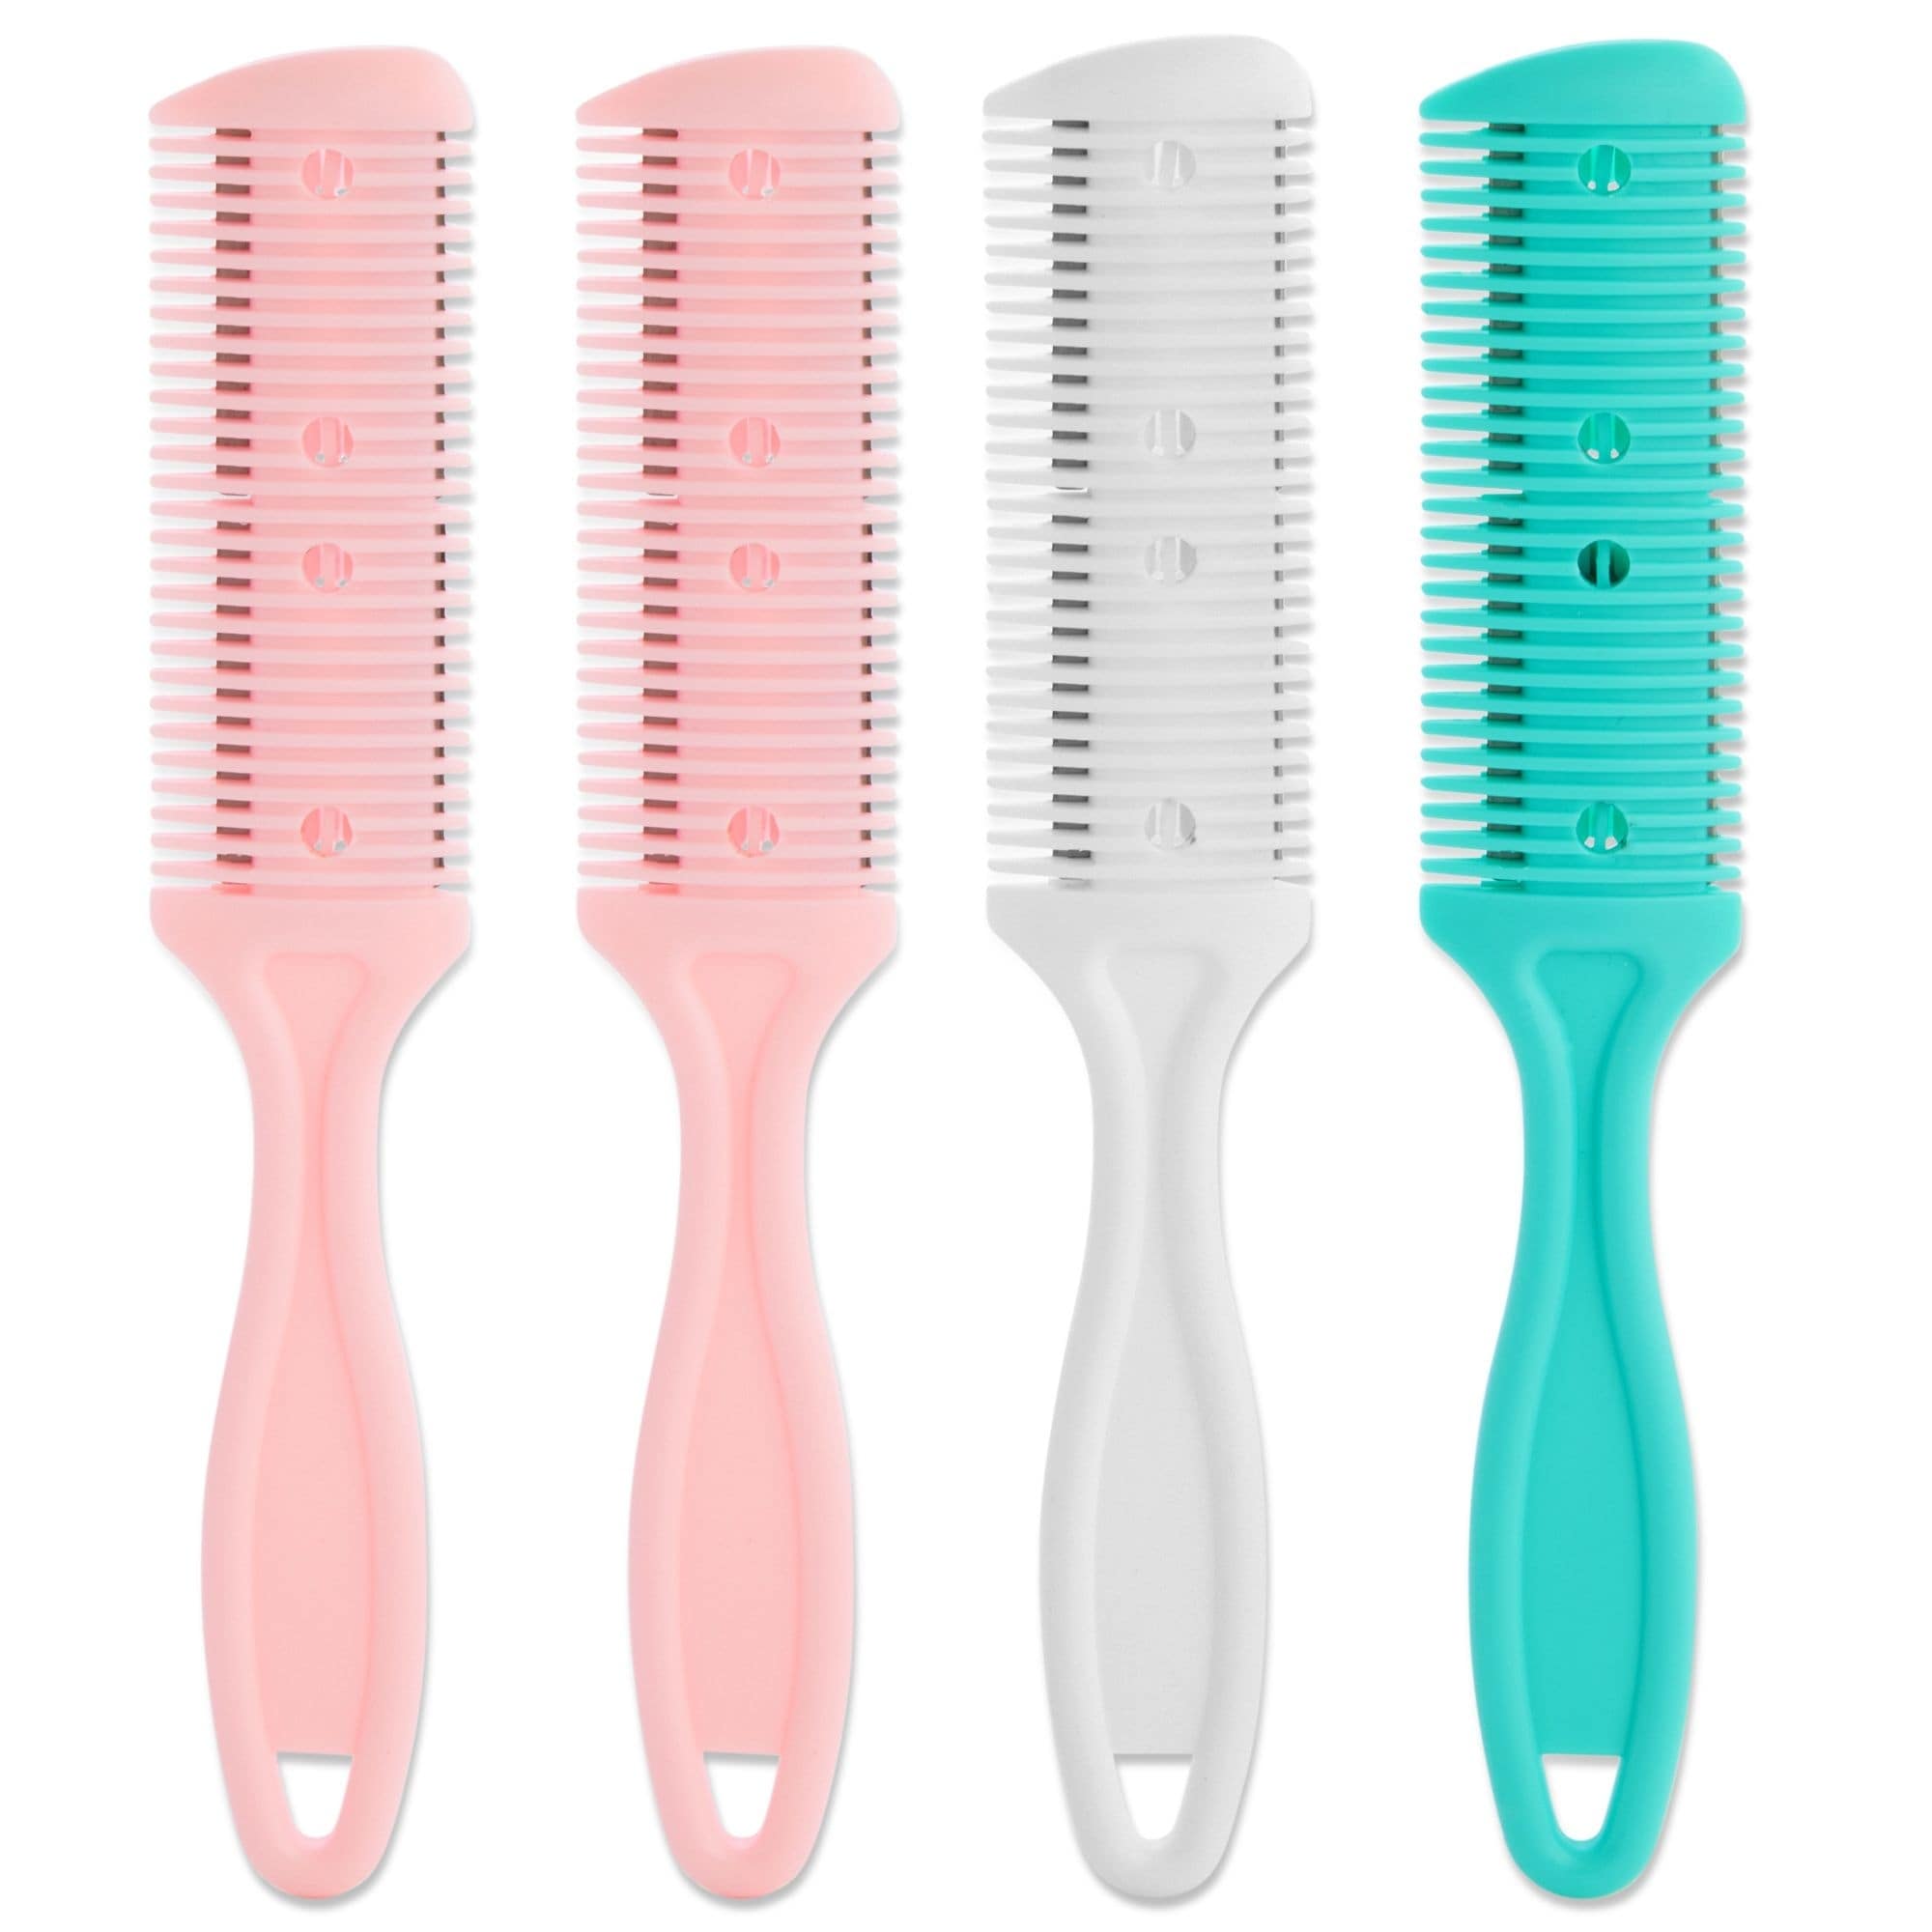 4 Pack Hair Thinning Comb Set, Razor Combs for Women (Assorted Colors, 7.1x1.2 inches) - Pink